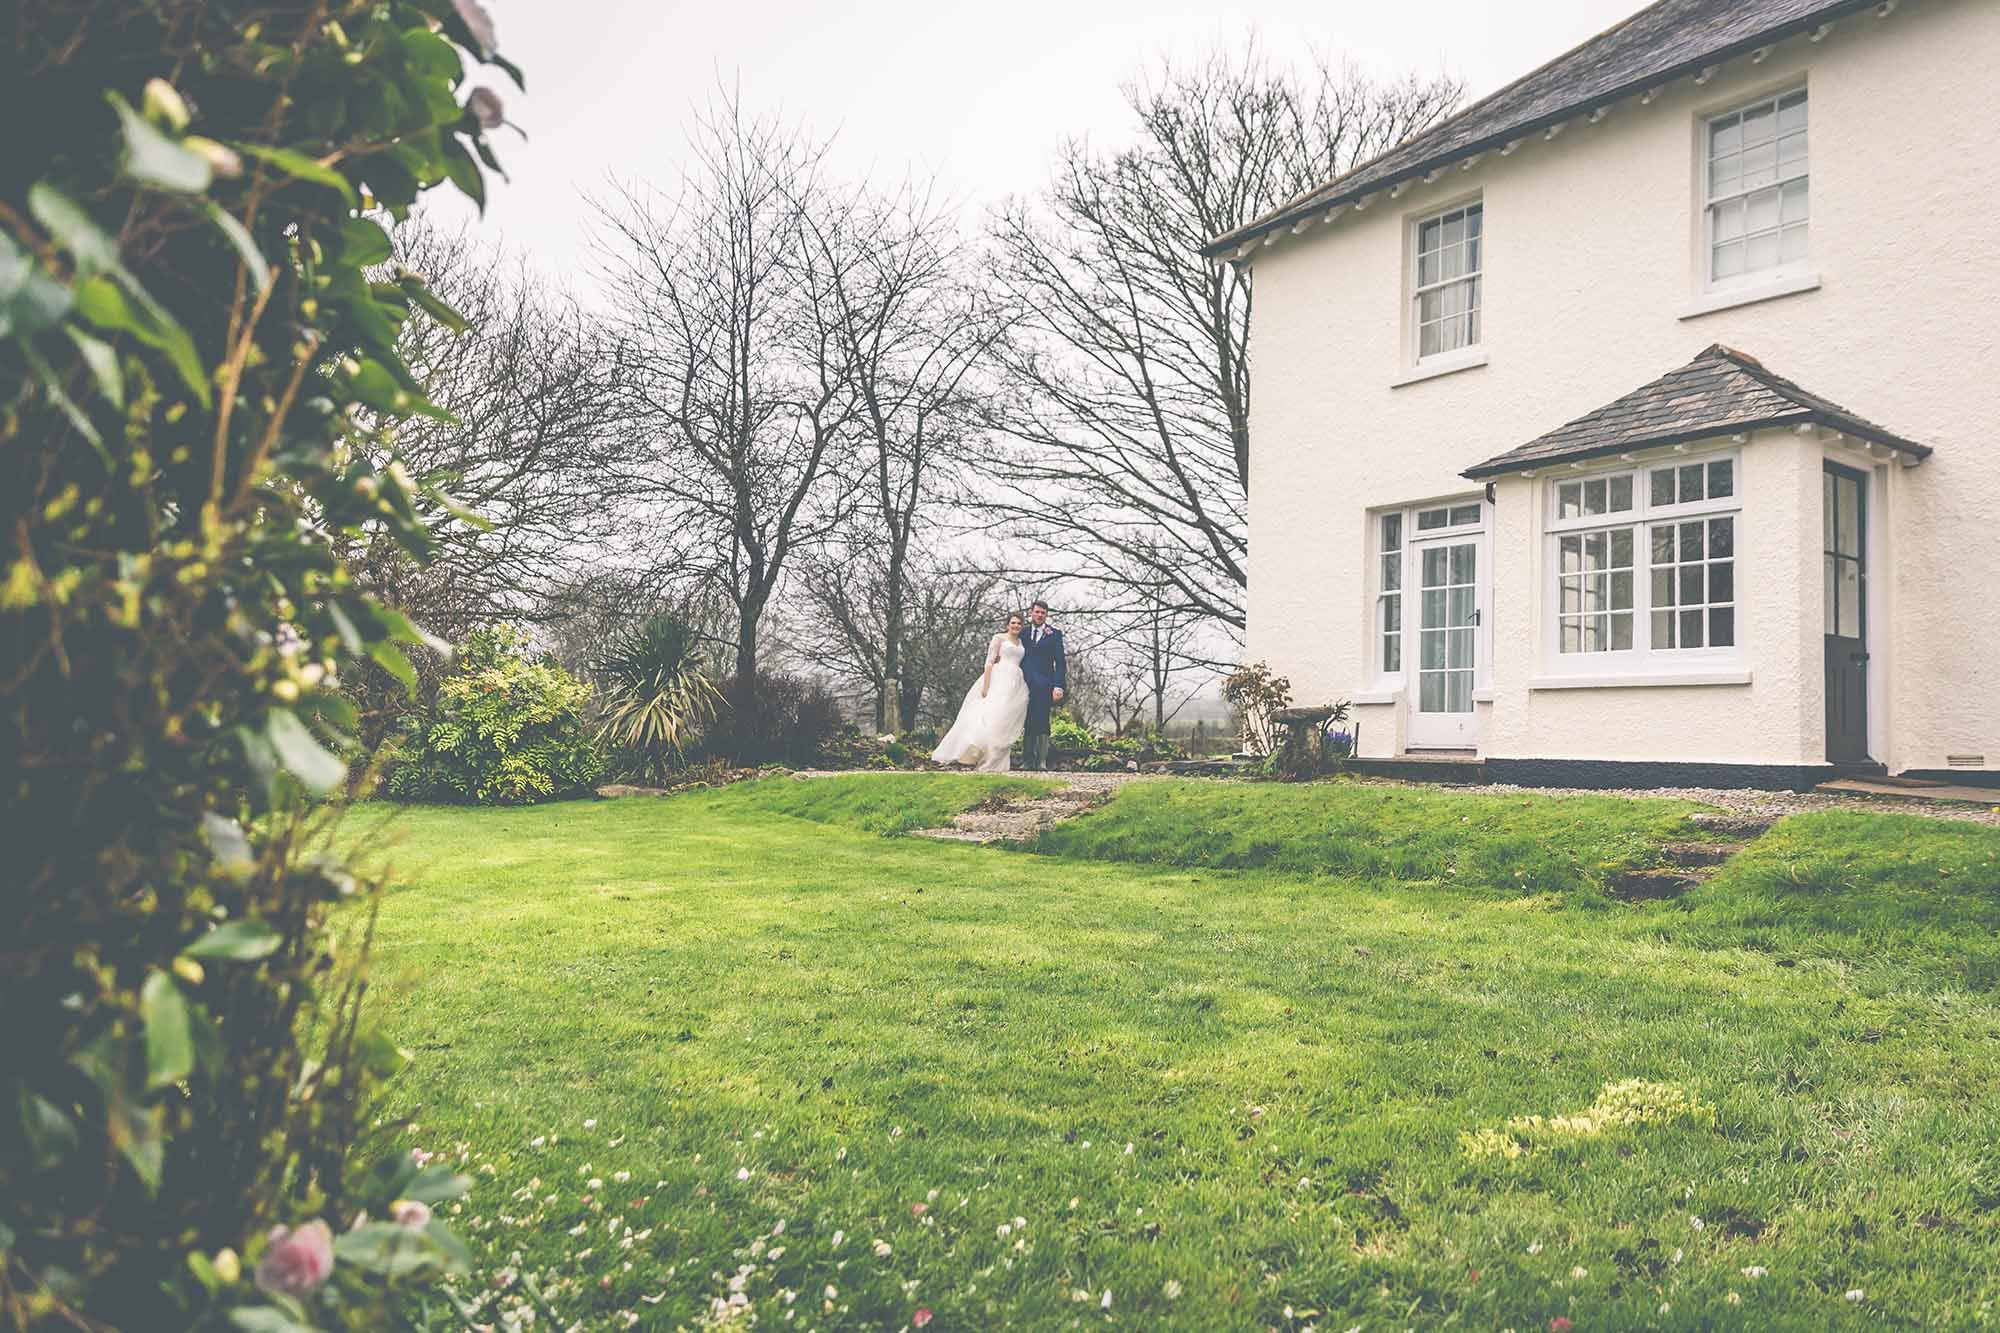 This is a picture of a bride and groom beside the farmhouse. The bride and groom are in the distance in the middle of the photo. The bottom half of the image is lawn. On the left there are some camellia bushes in the foreground. In the background there are some trees without any leaves. The farmhouse takes up the top, right hand quadrant of the image. Only part of the framhouse is in the shot. The farmhouse is rendered and painted white. It has a gray slate roof. The windows are georgian style sash windows and are painted white. There are two windows on the first floor and a French door on the ground floor. There is a porch with two sets of Georgian windows and a pitched slate roof. On the right hand side of the porch there is a black half-glazed door. There is a slight rise up towards the house and there is a small set of three steps on the left and a small step for three steps on the right of this ridge. The bride and groom are standing at the top of the steps on the left hand side of the house. The bride is wearing a white full gown with long sleeves. The groom is wearing a dark suit. There are some camellia petals on the lawn from the bushes indicating that the picture is taken in early spring.